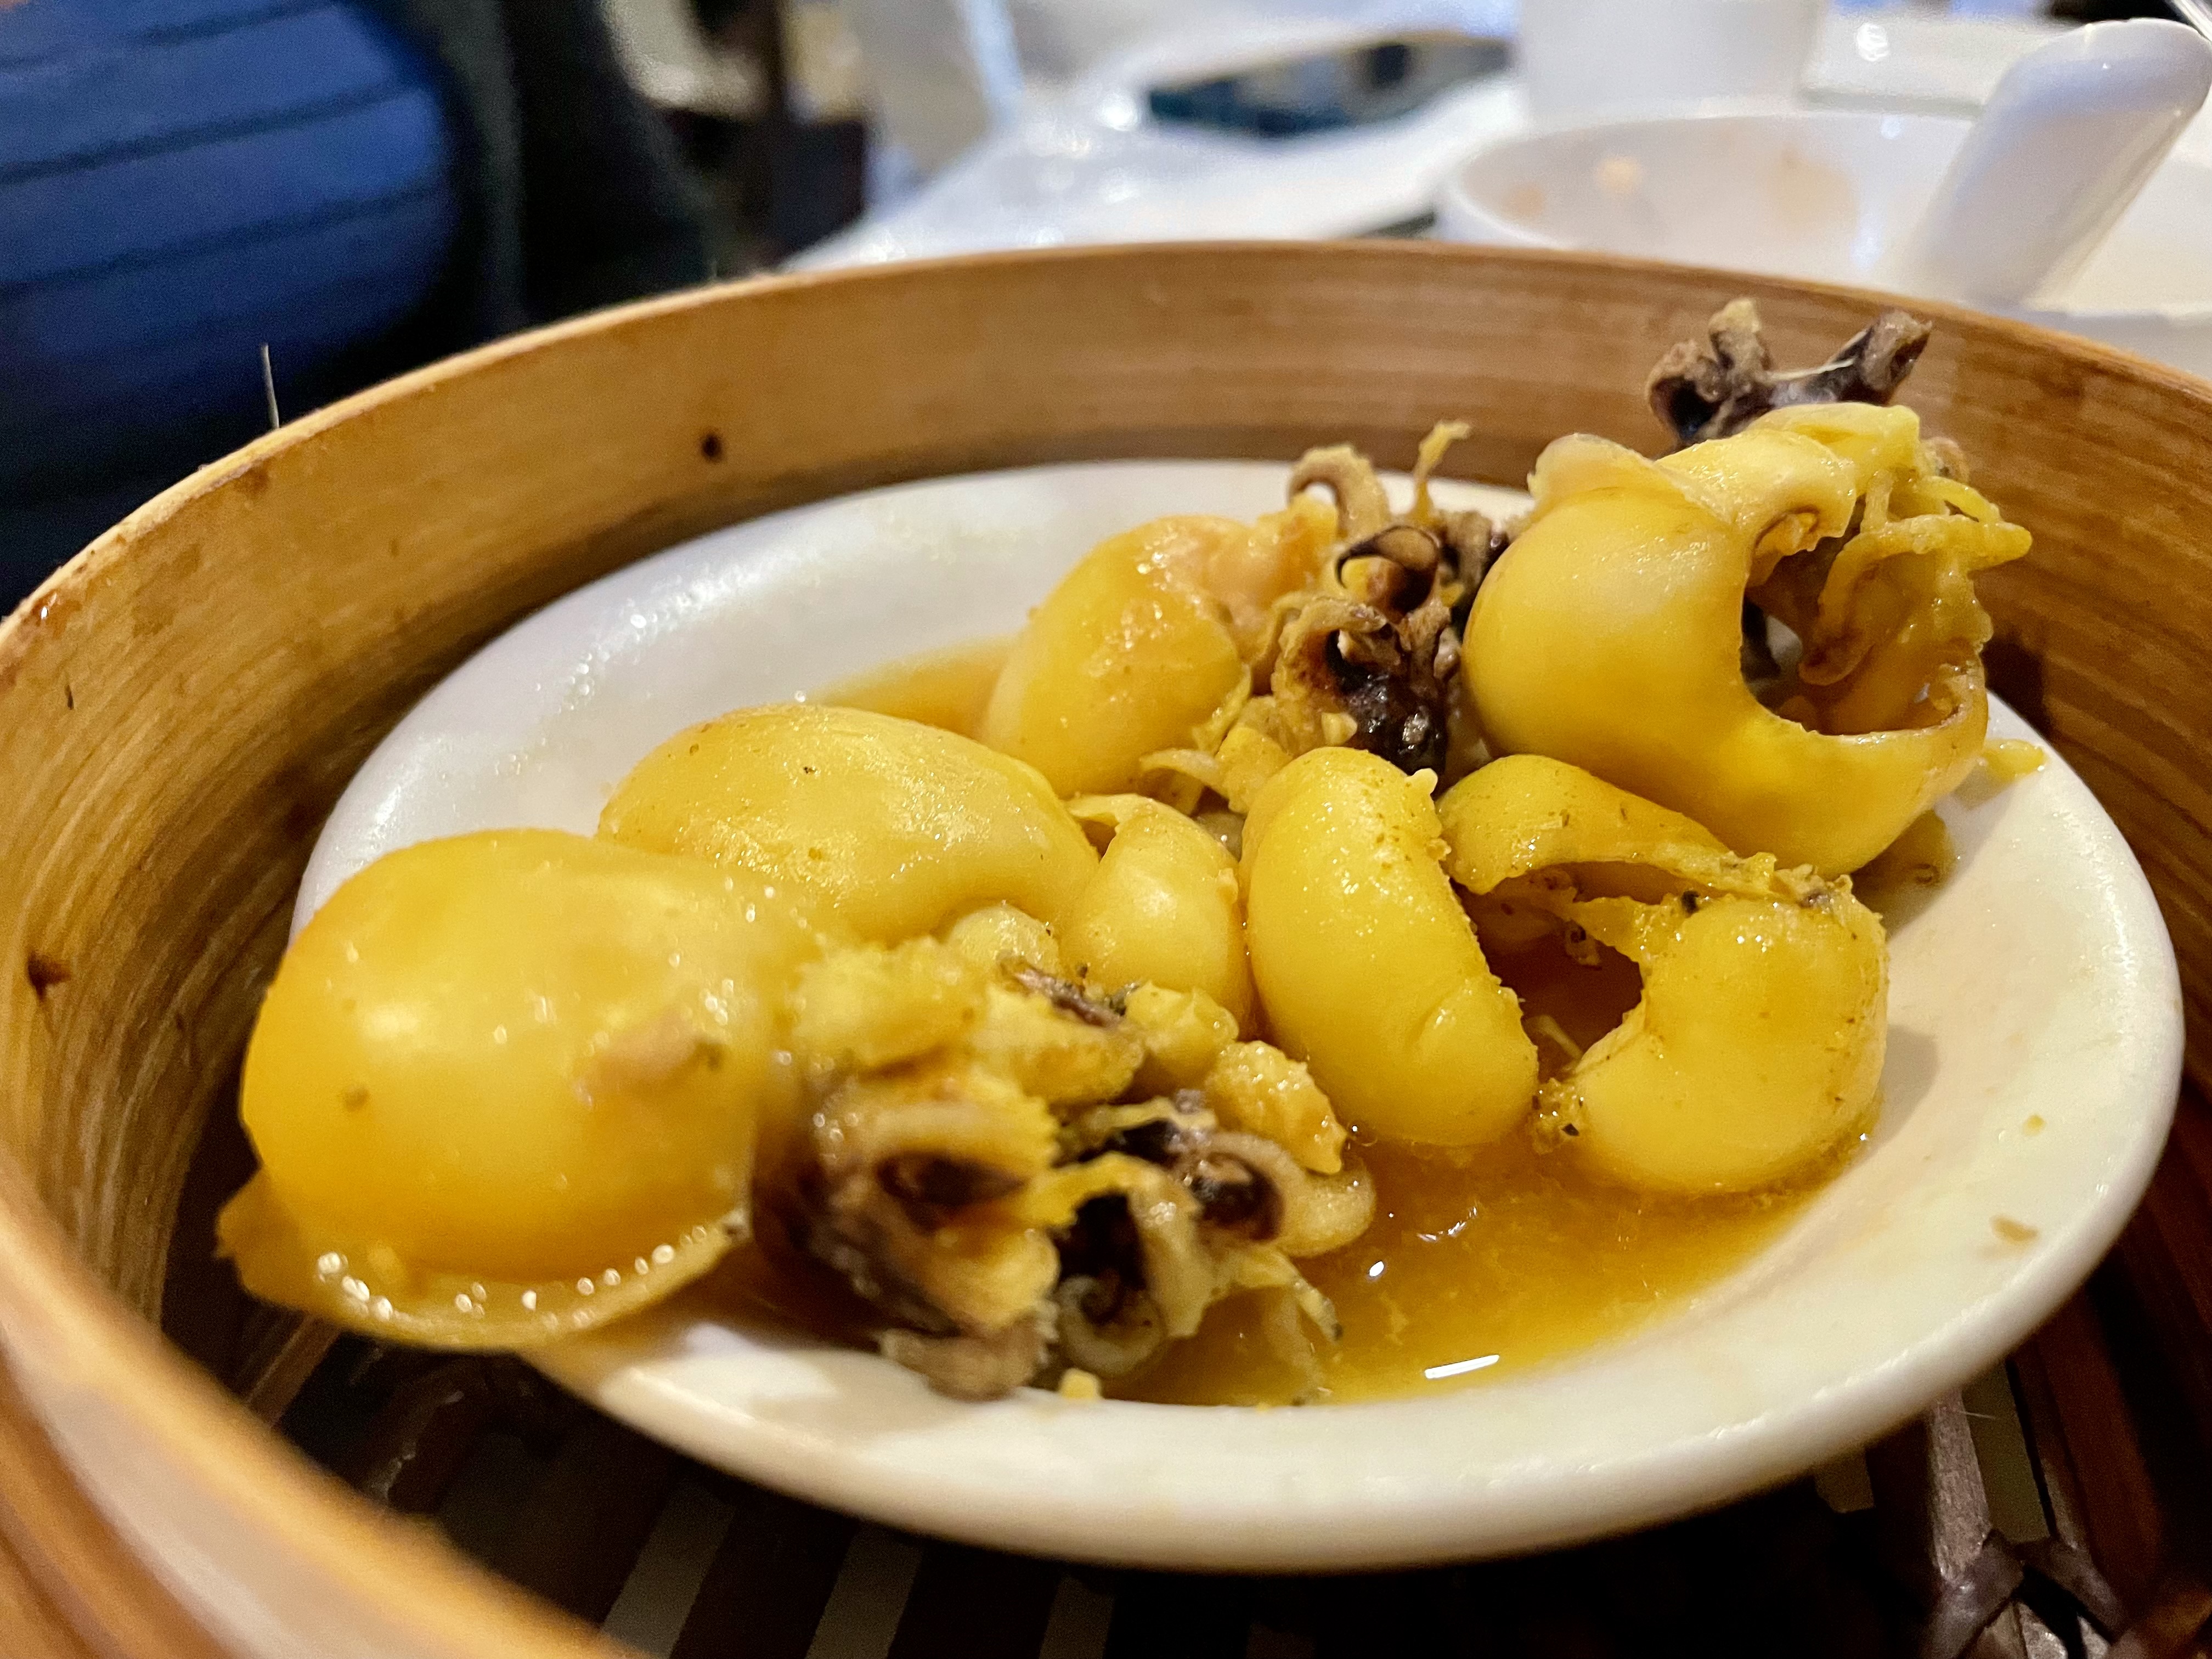 The cuttlefish was creamy, served with a squid-like consistency and one of our favourite parts of the meal